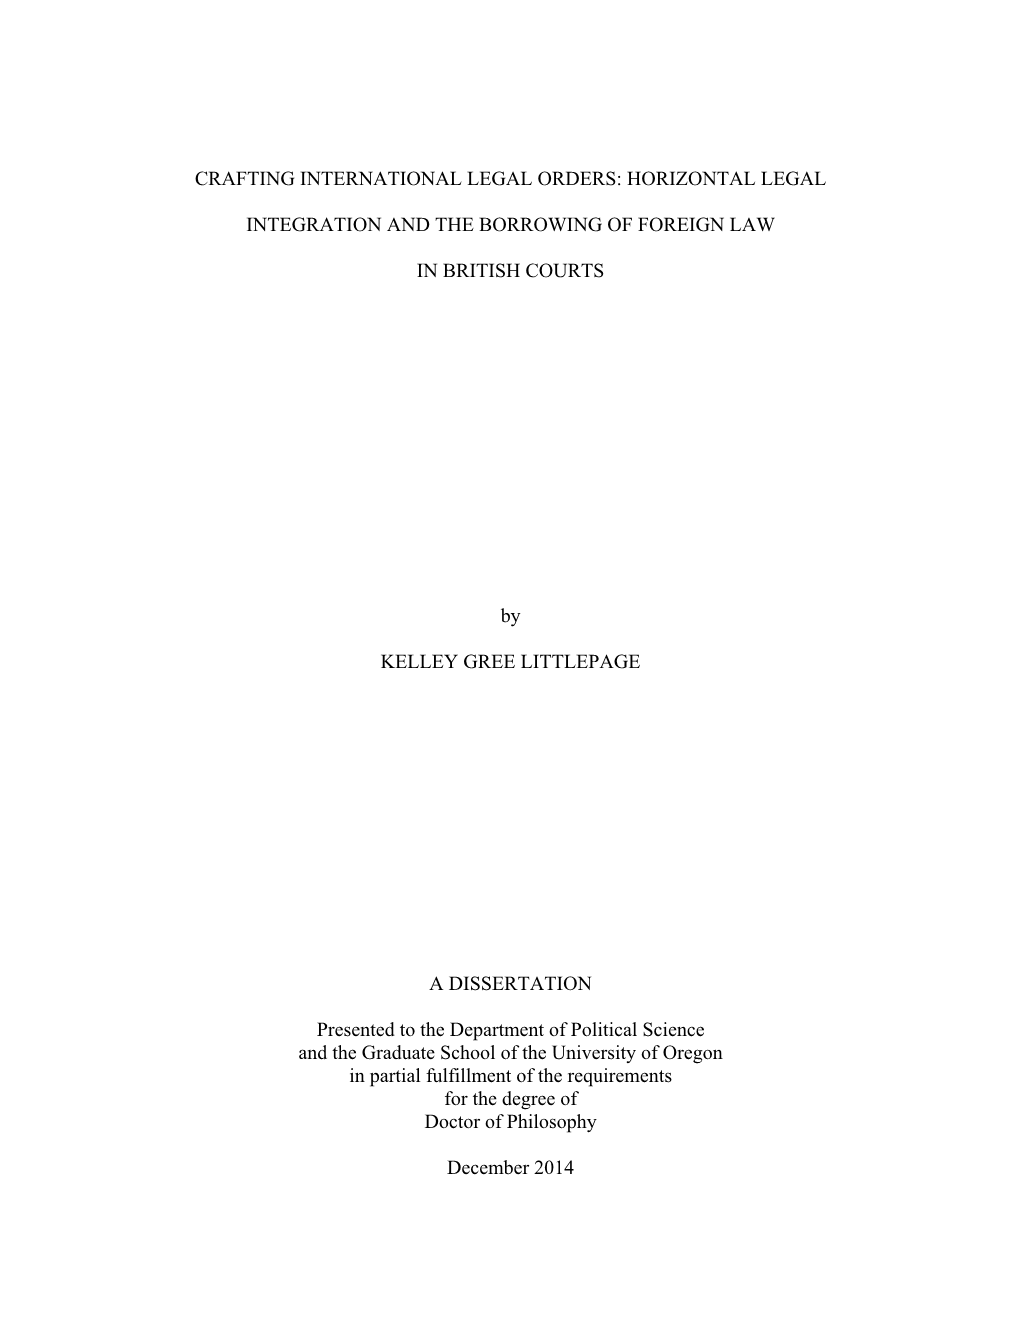 HORIZONTAL LEGAL INTEGRATION and the BORROWING of FOREIGN LAW in BRITISH COURTS by KELLEY